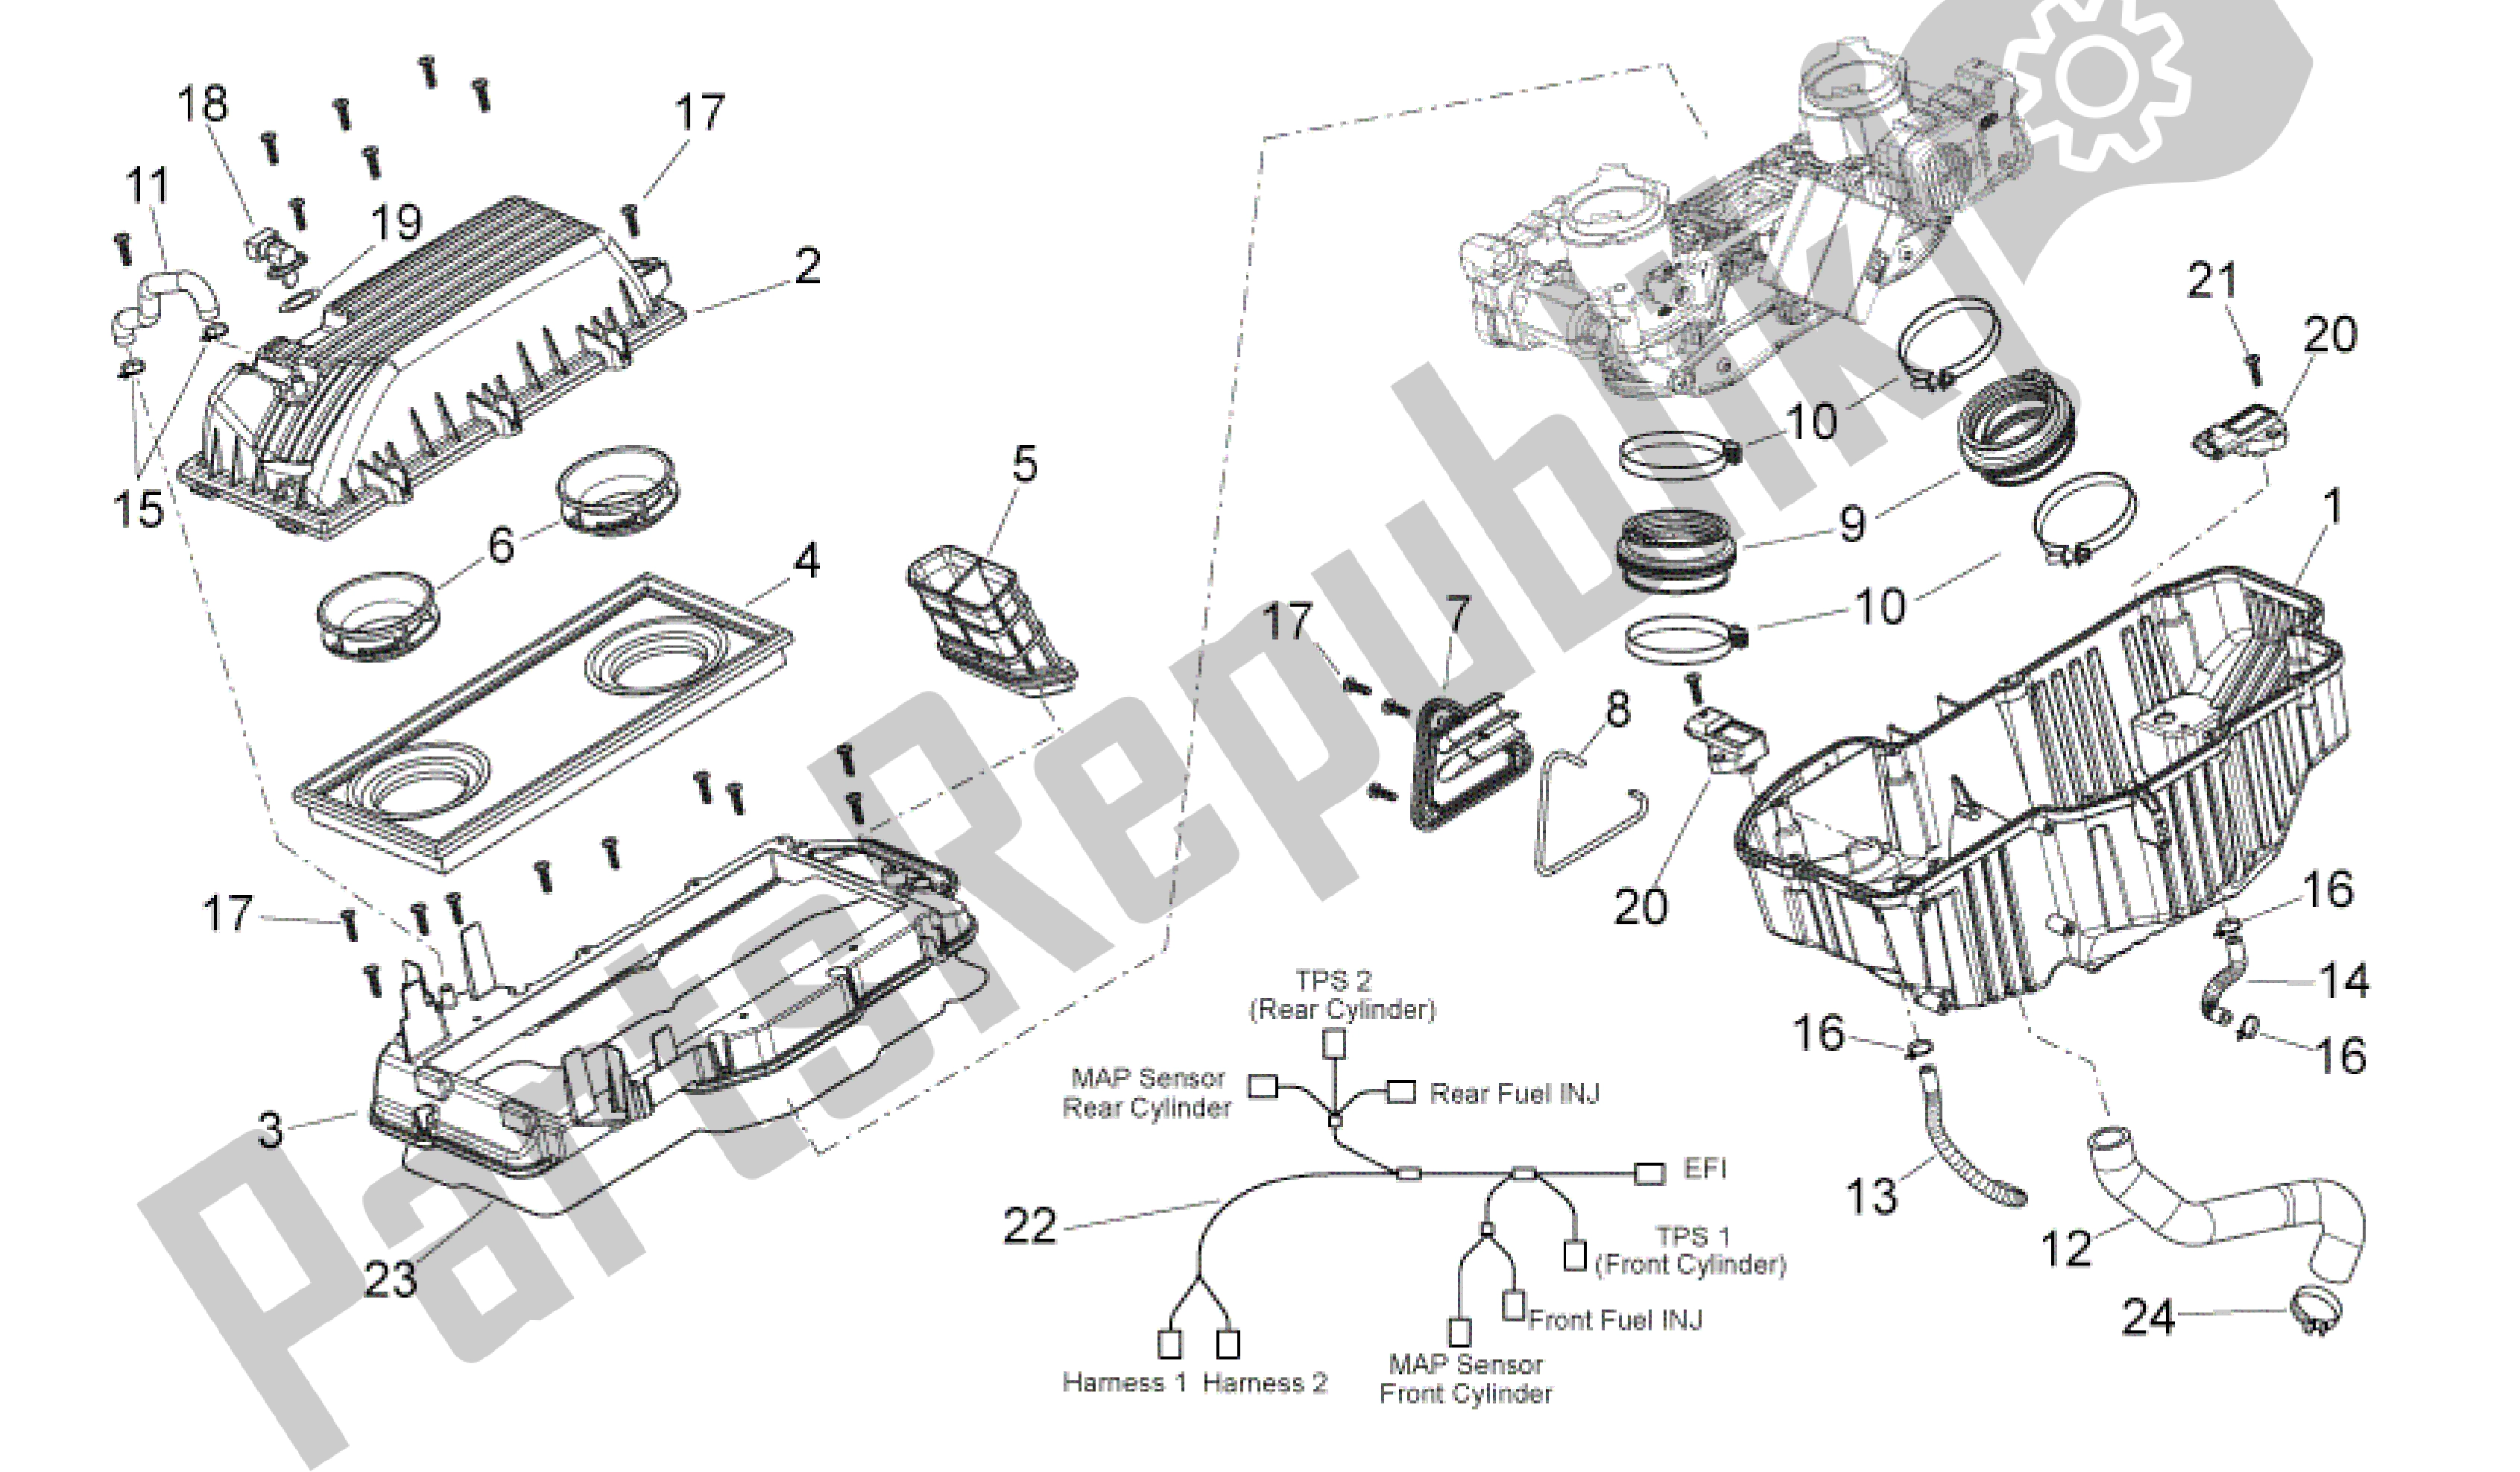 All parts for the Air Box of the Aprilia Shiver 750 2007 - 2009